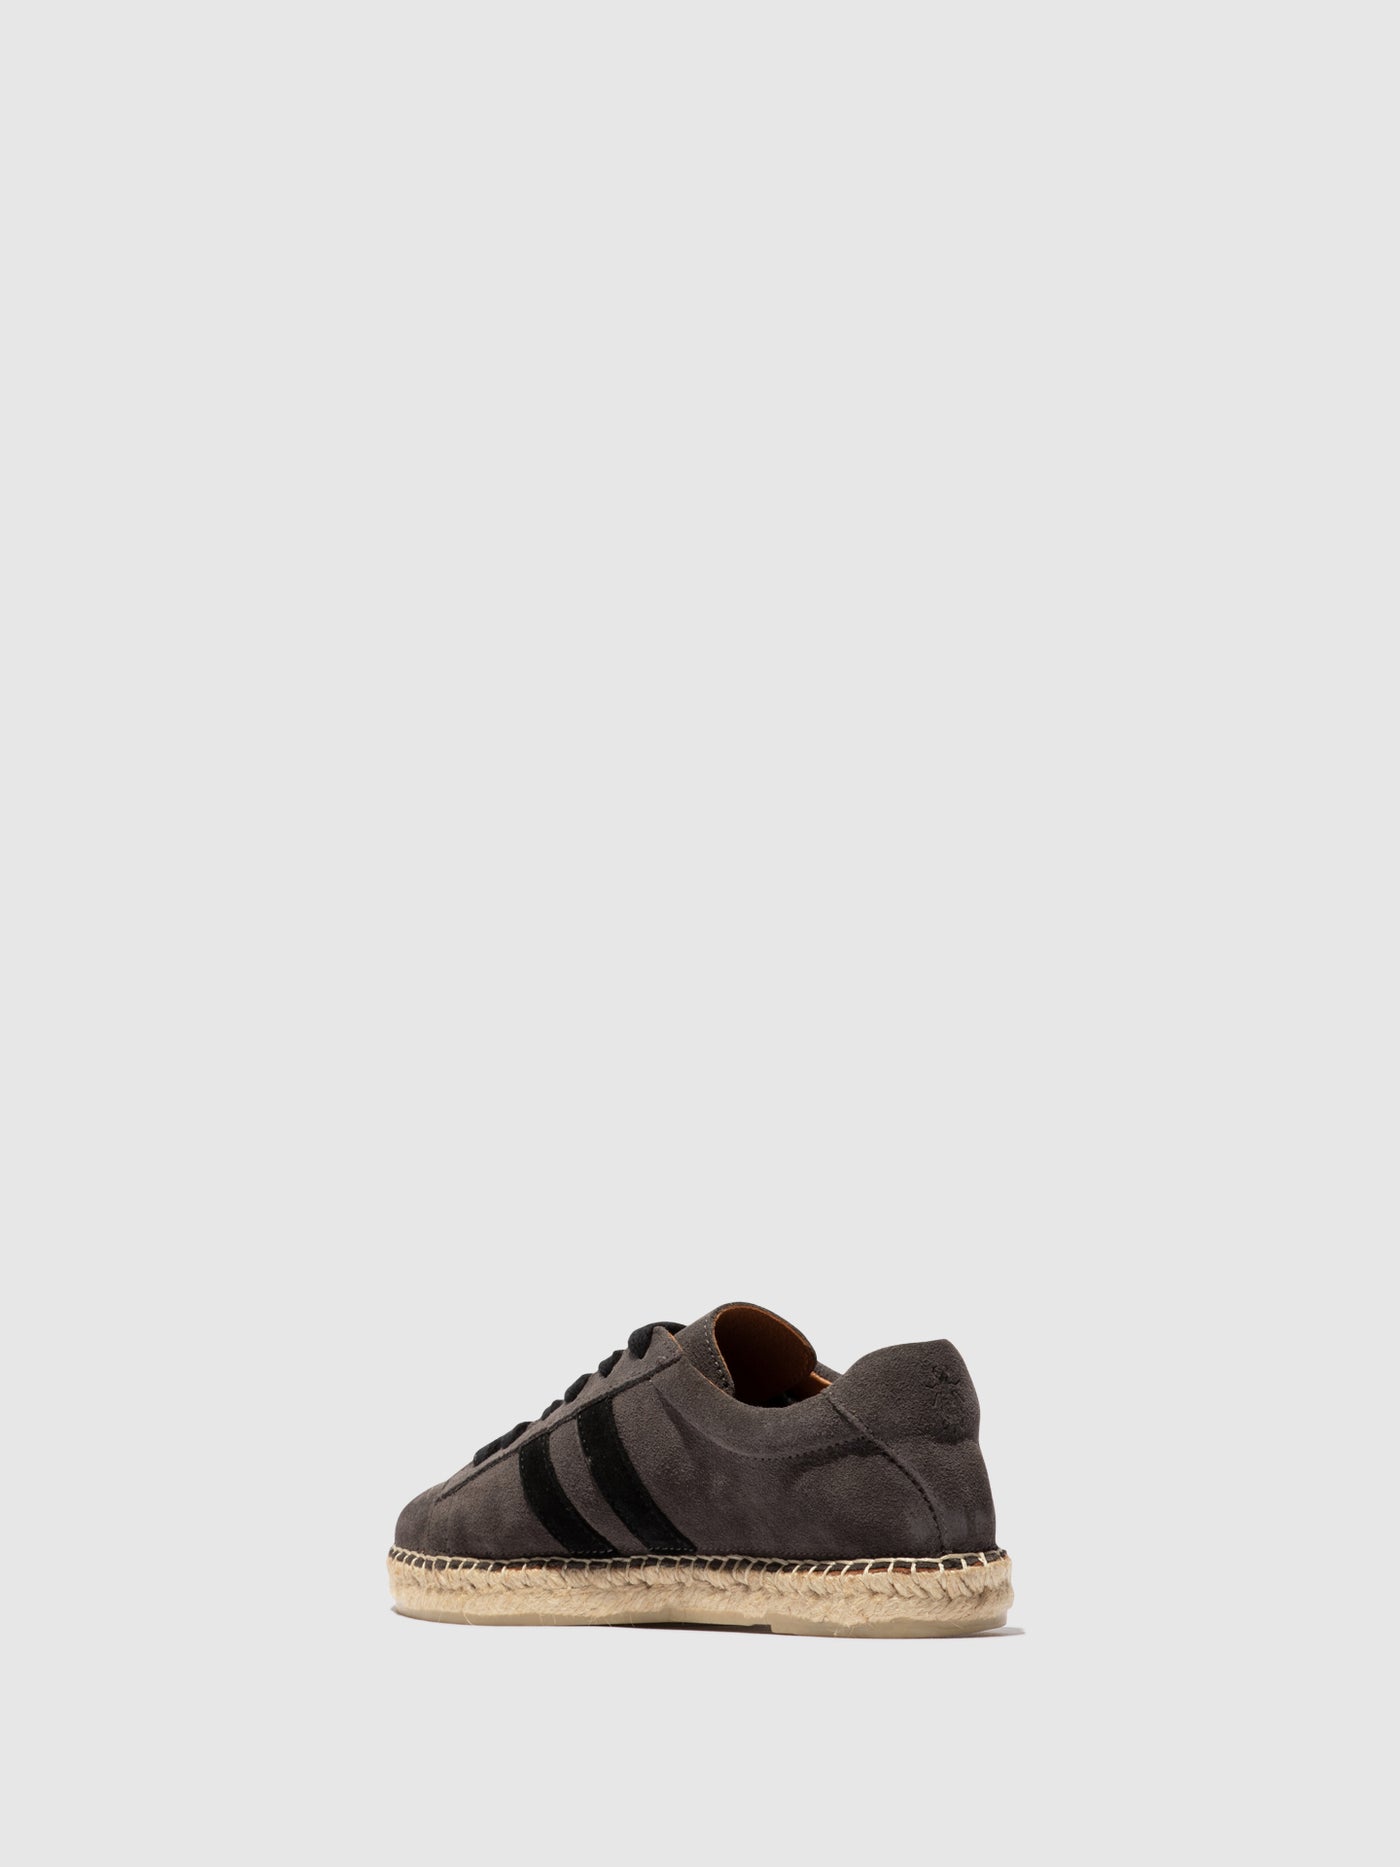 Lace-up Espadrilles SCAM529FLY GREY/BLACK